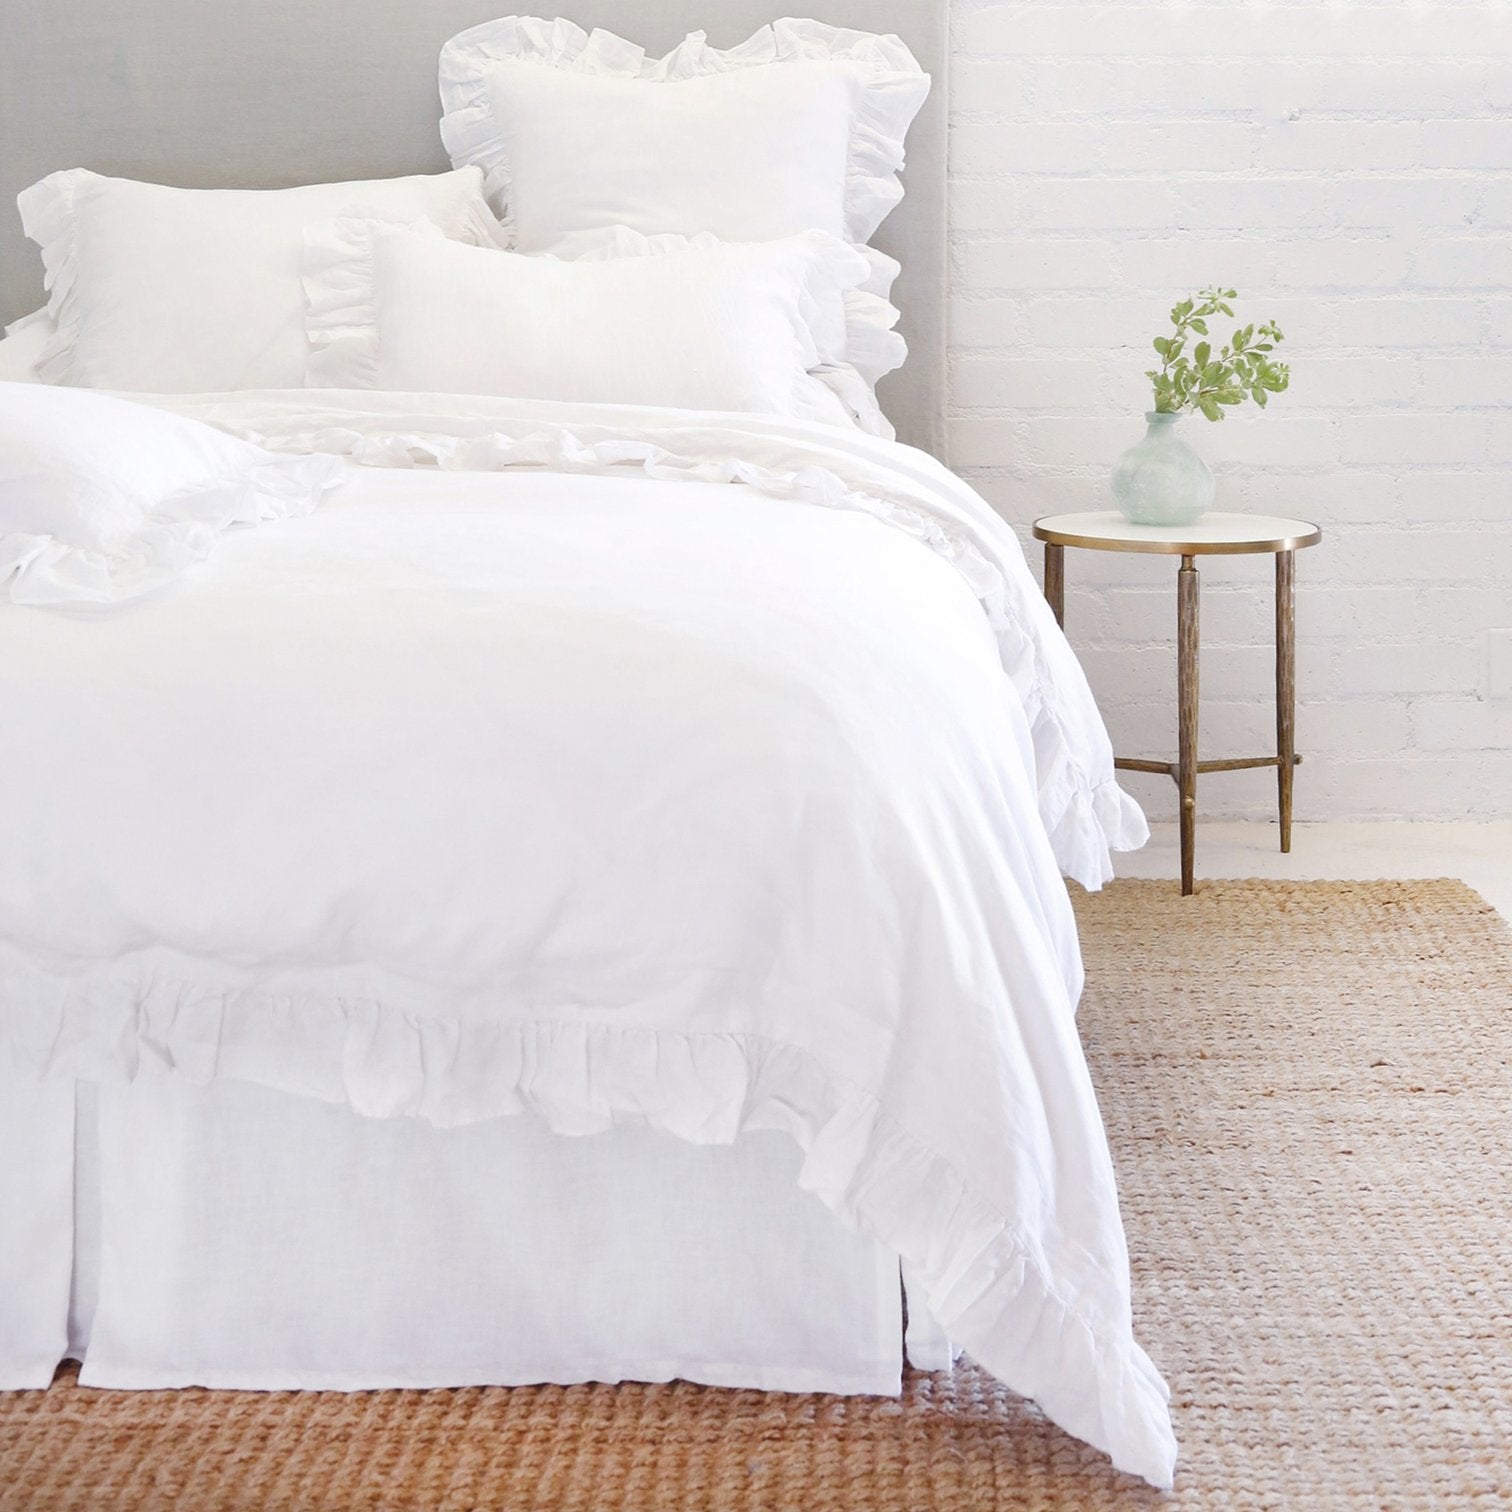 white linen bedding with ruffle on bed